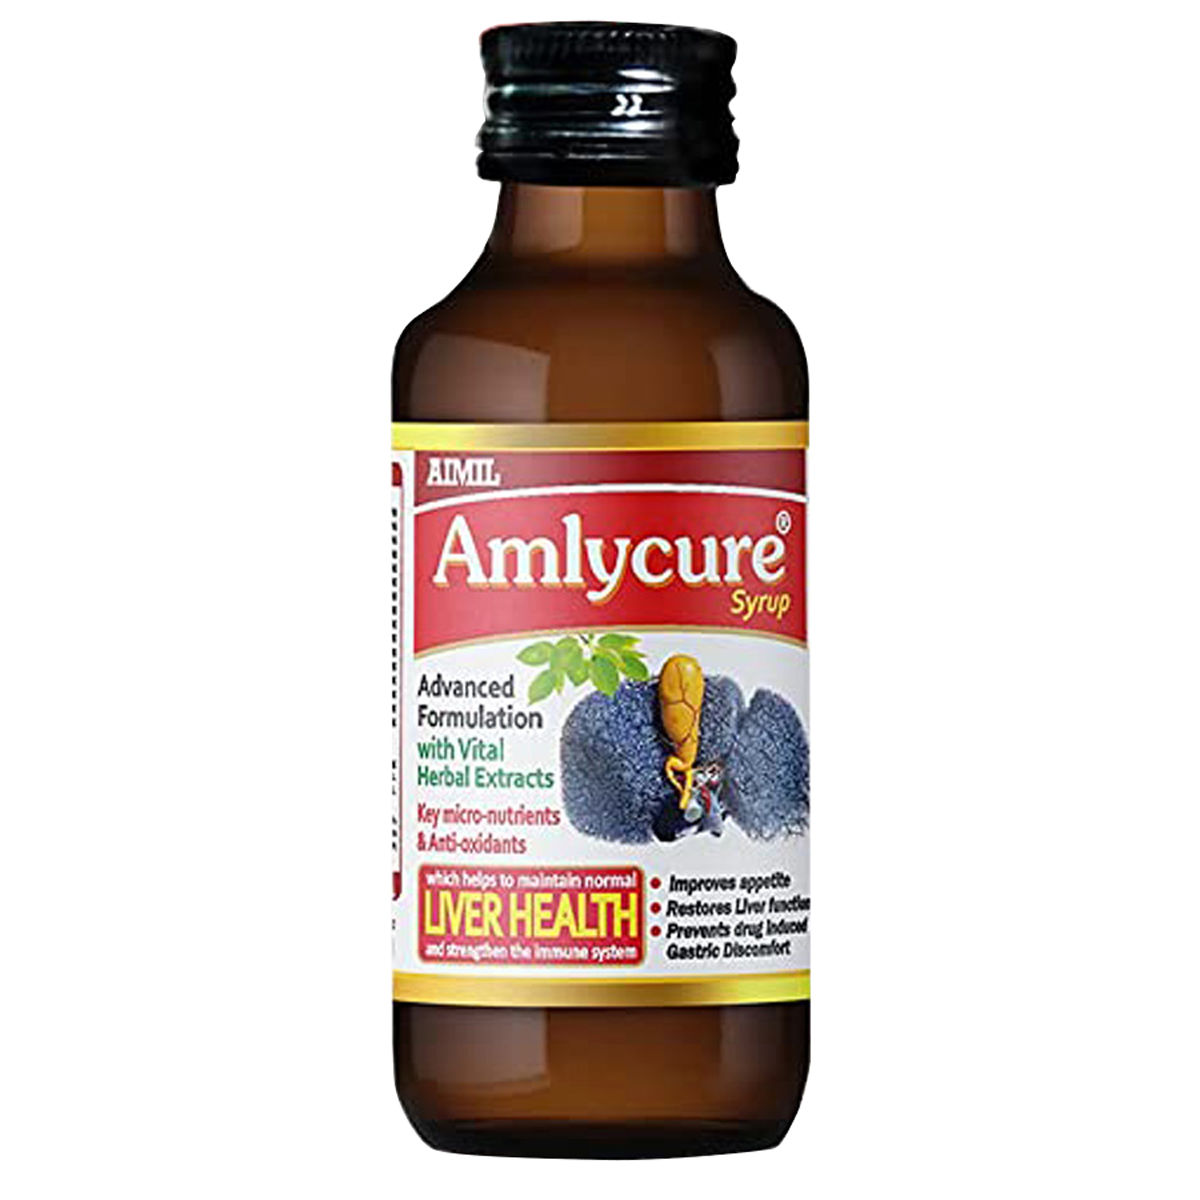 Buy Aimil Amlycure Syrup, 100 ml Online